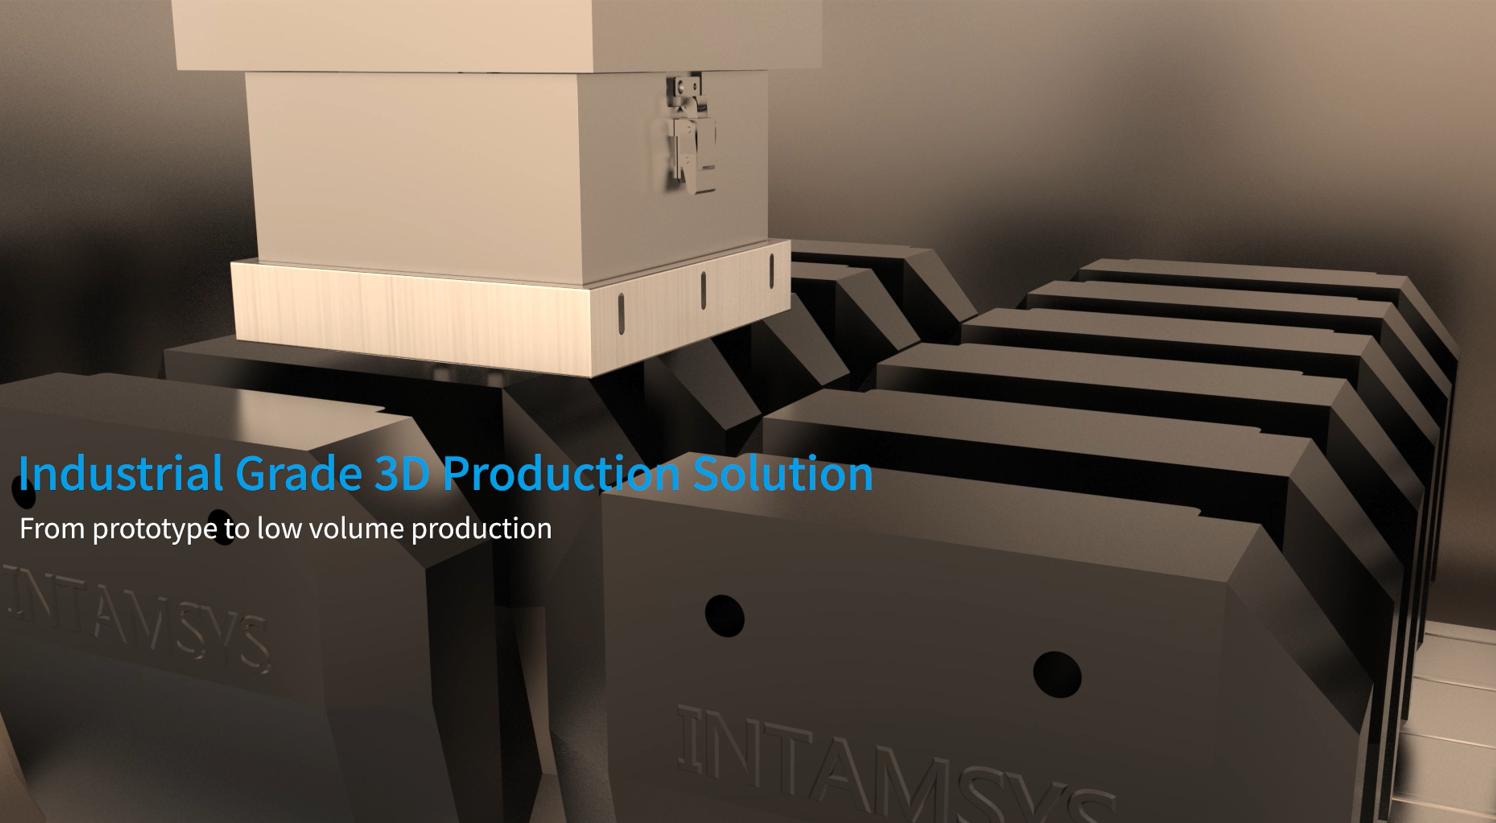 Industrial grade 3D production solution